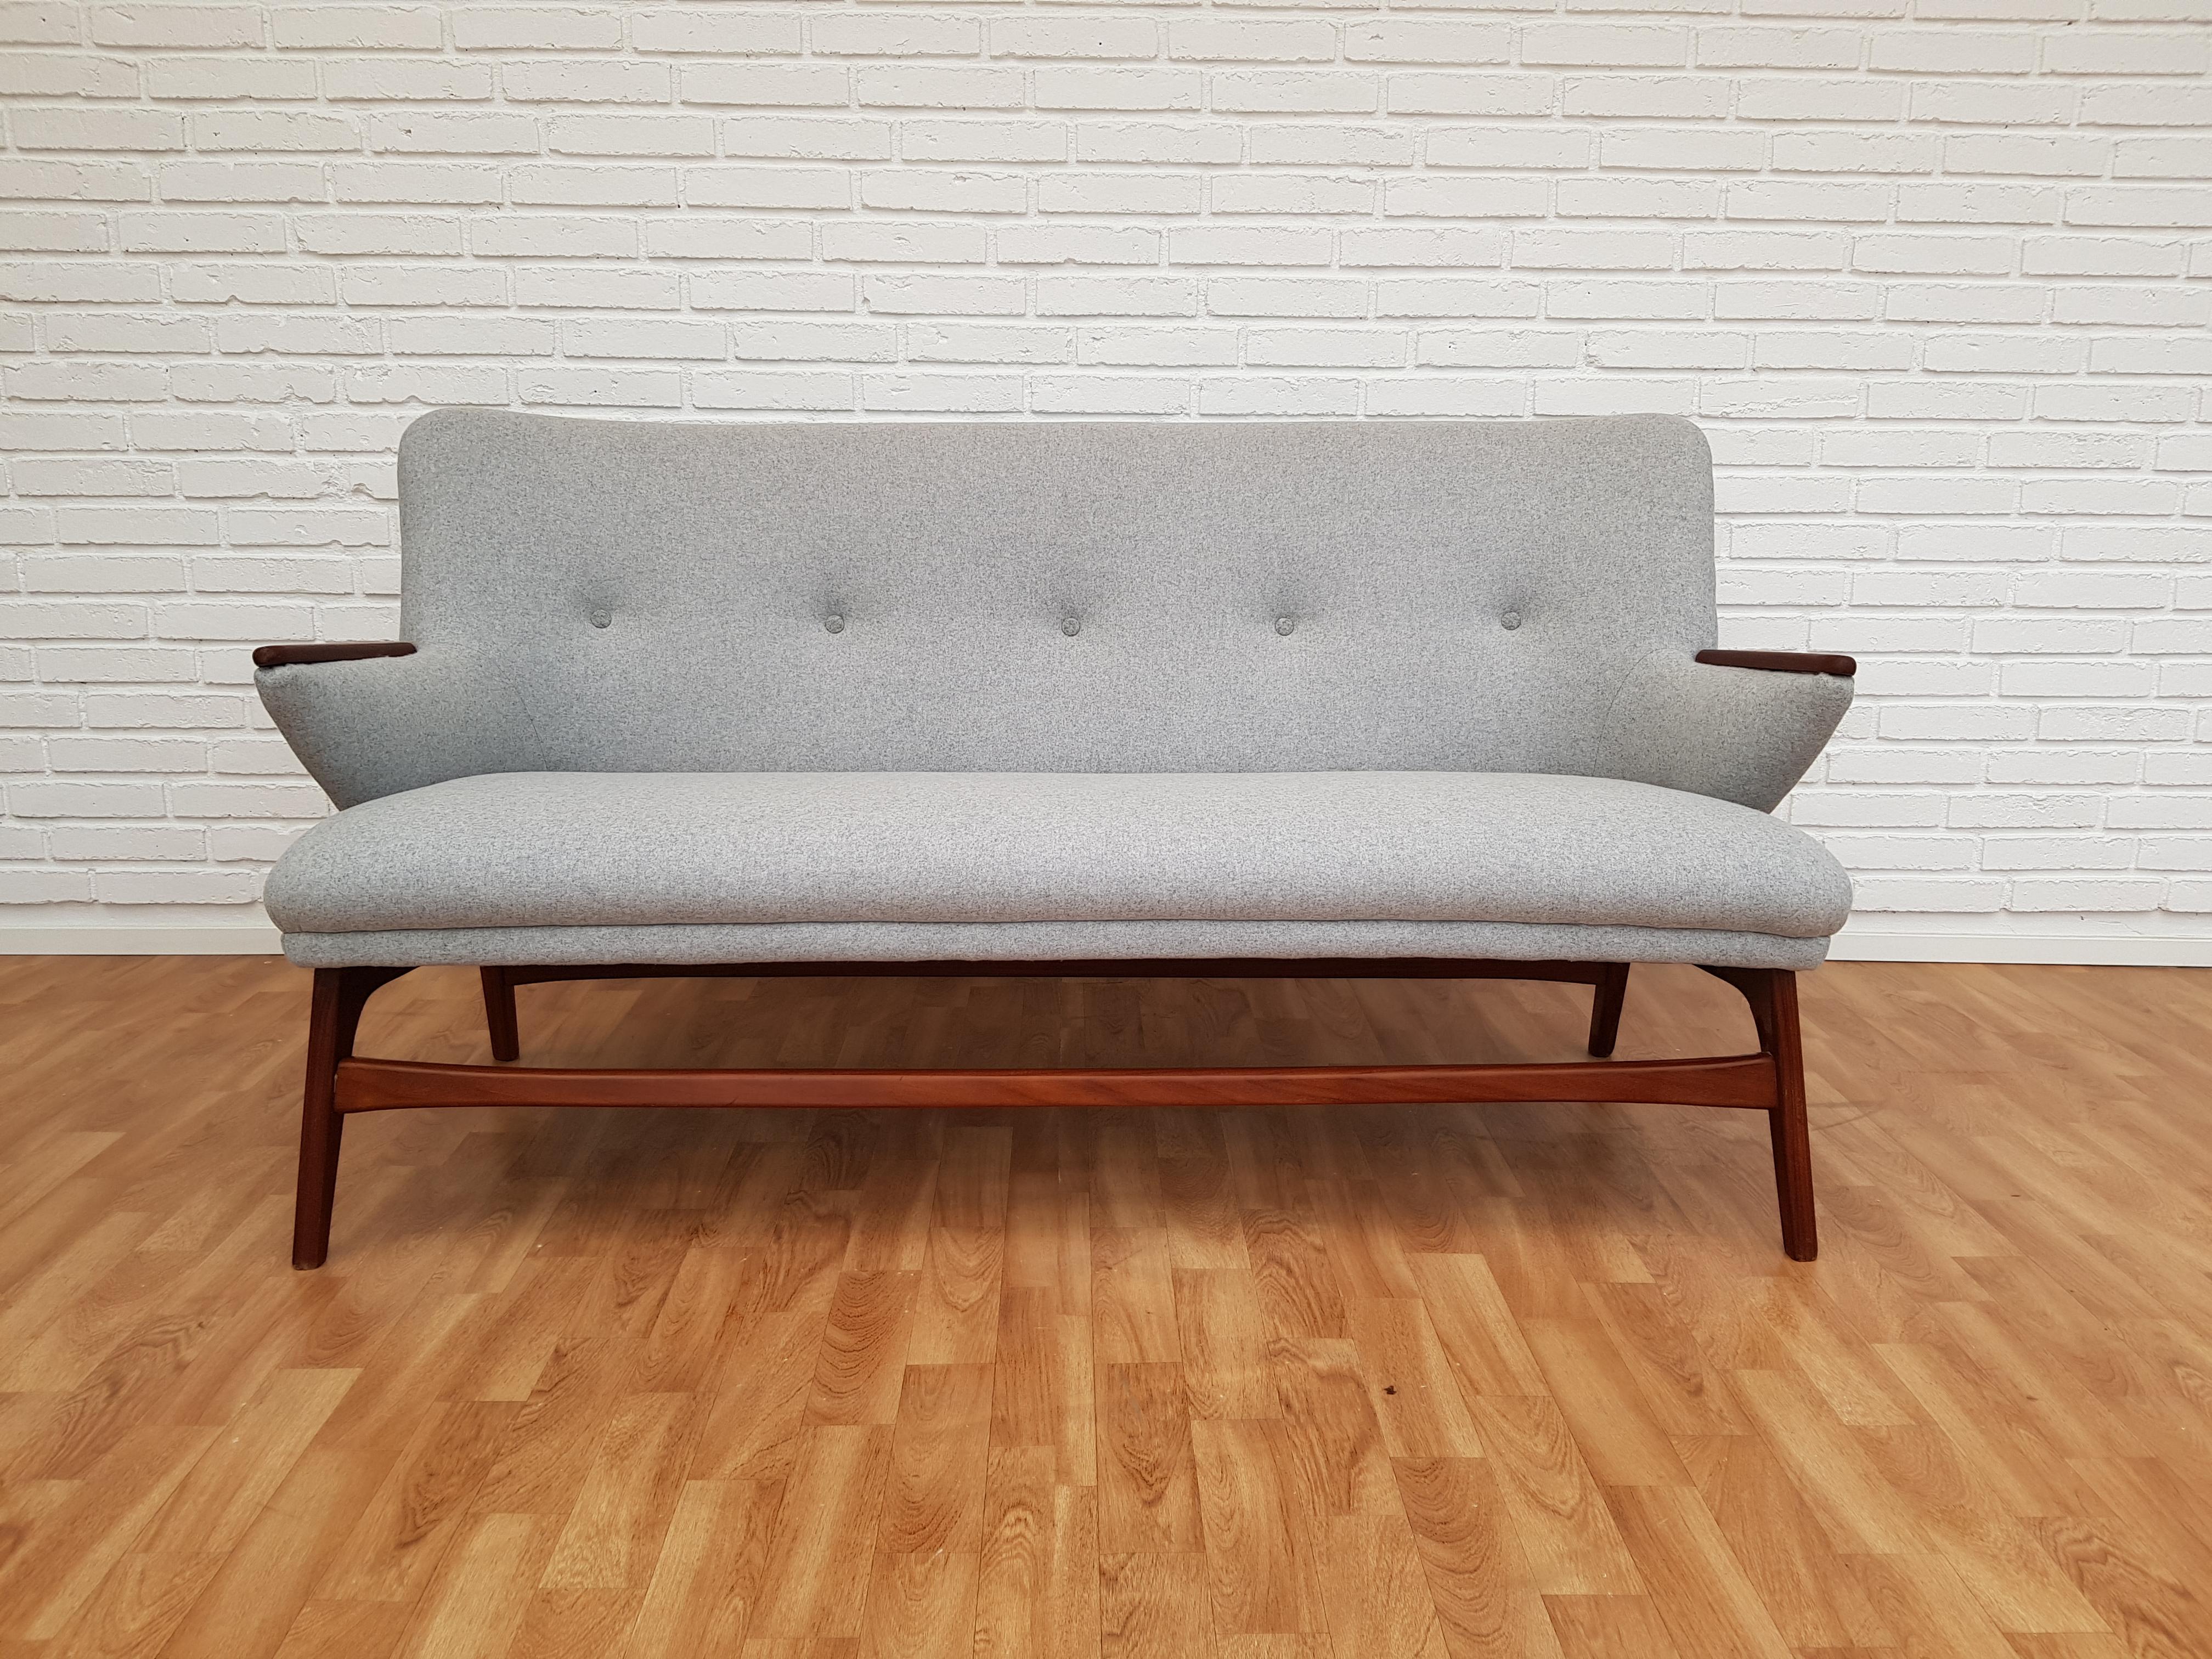 Danish designed sofa set. High-backed armchair, low armchair, sofa. Teak wood. Produced by Danish furniture manufacturer in circa 1960. New reupholstered in the quality dark grey wool fabric and grey wool fabric. Restored by furniture craftsman at